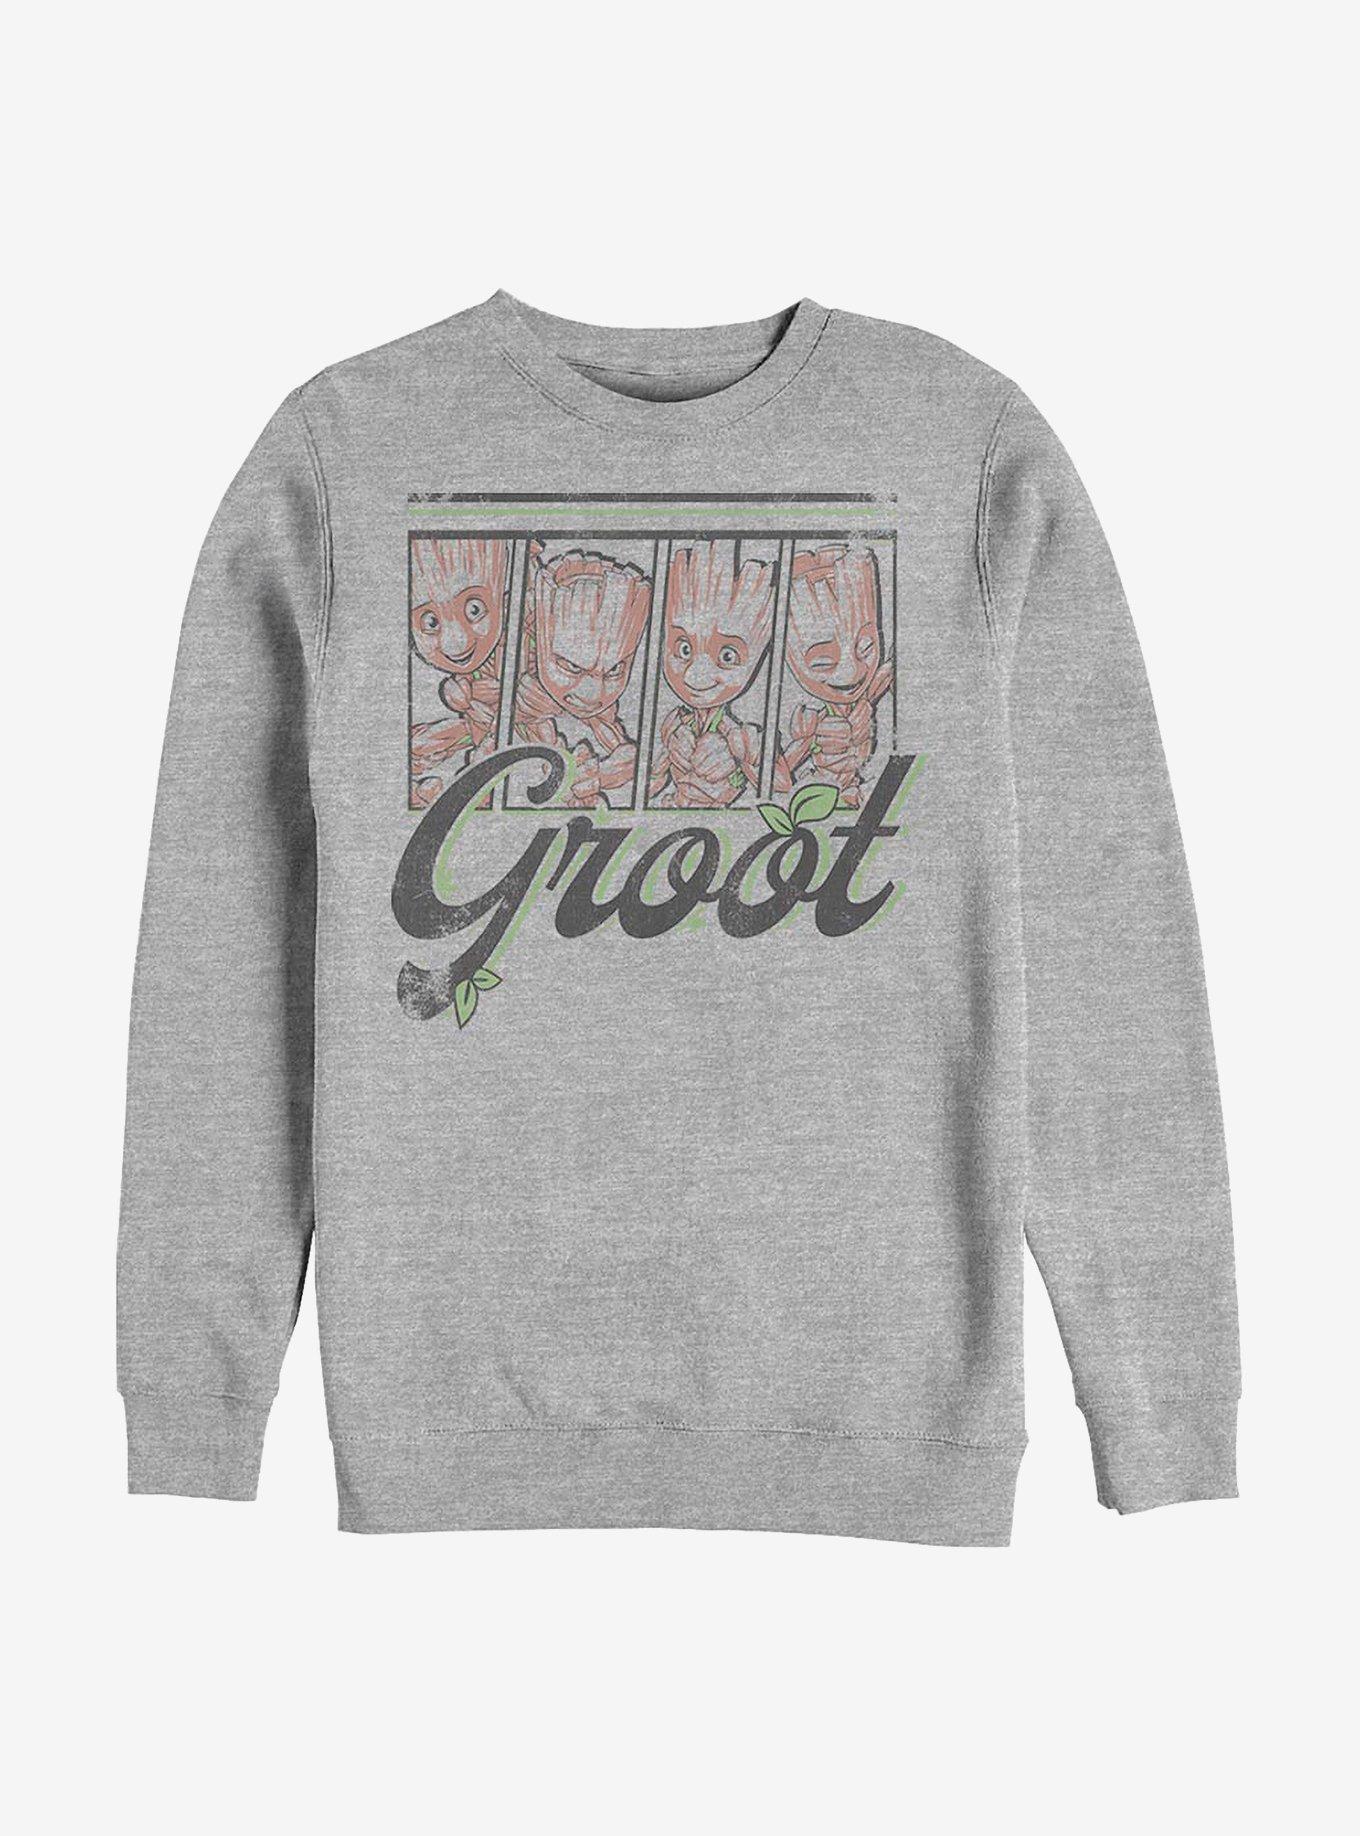 Marvel Guardians Of The Galaxy Four Panel Groot Sweatshirt, ATH HTR, hi-res